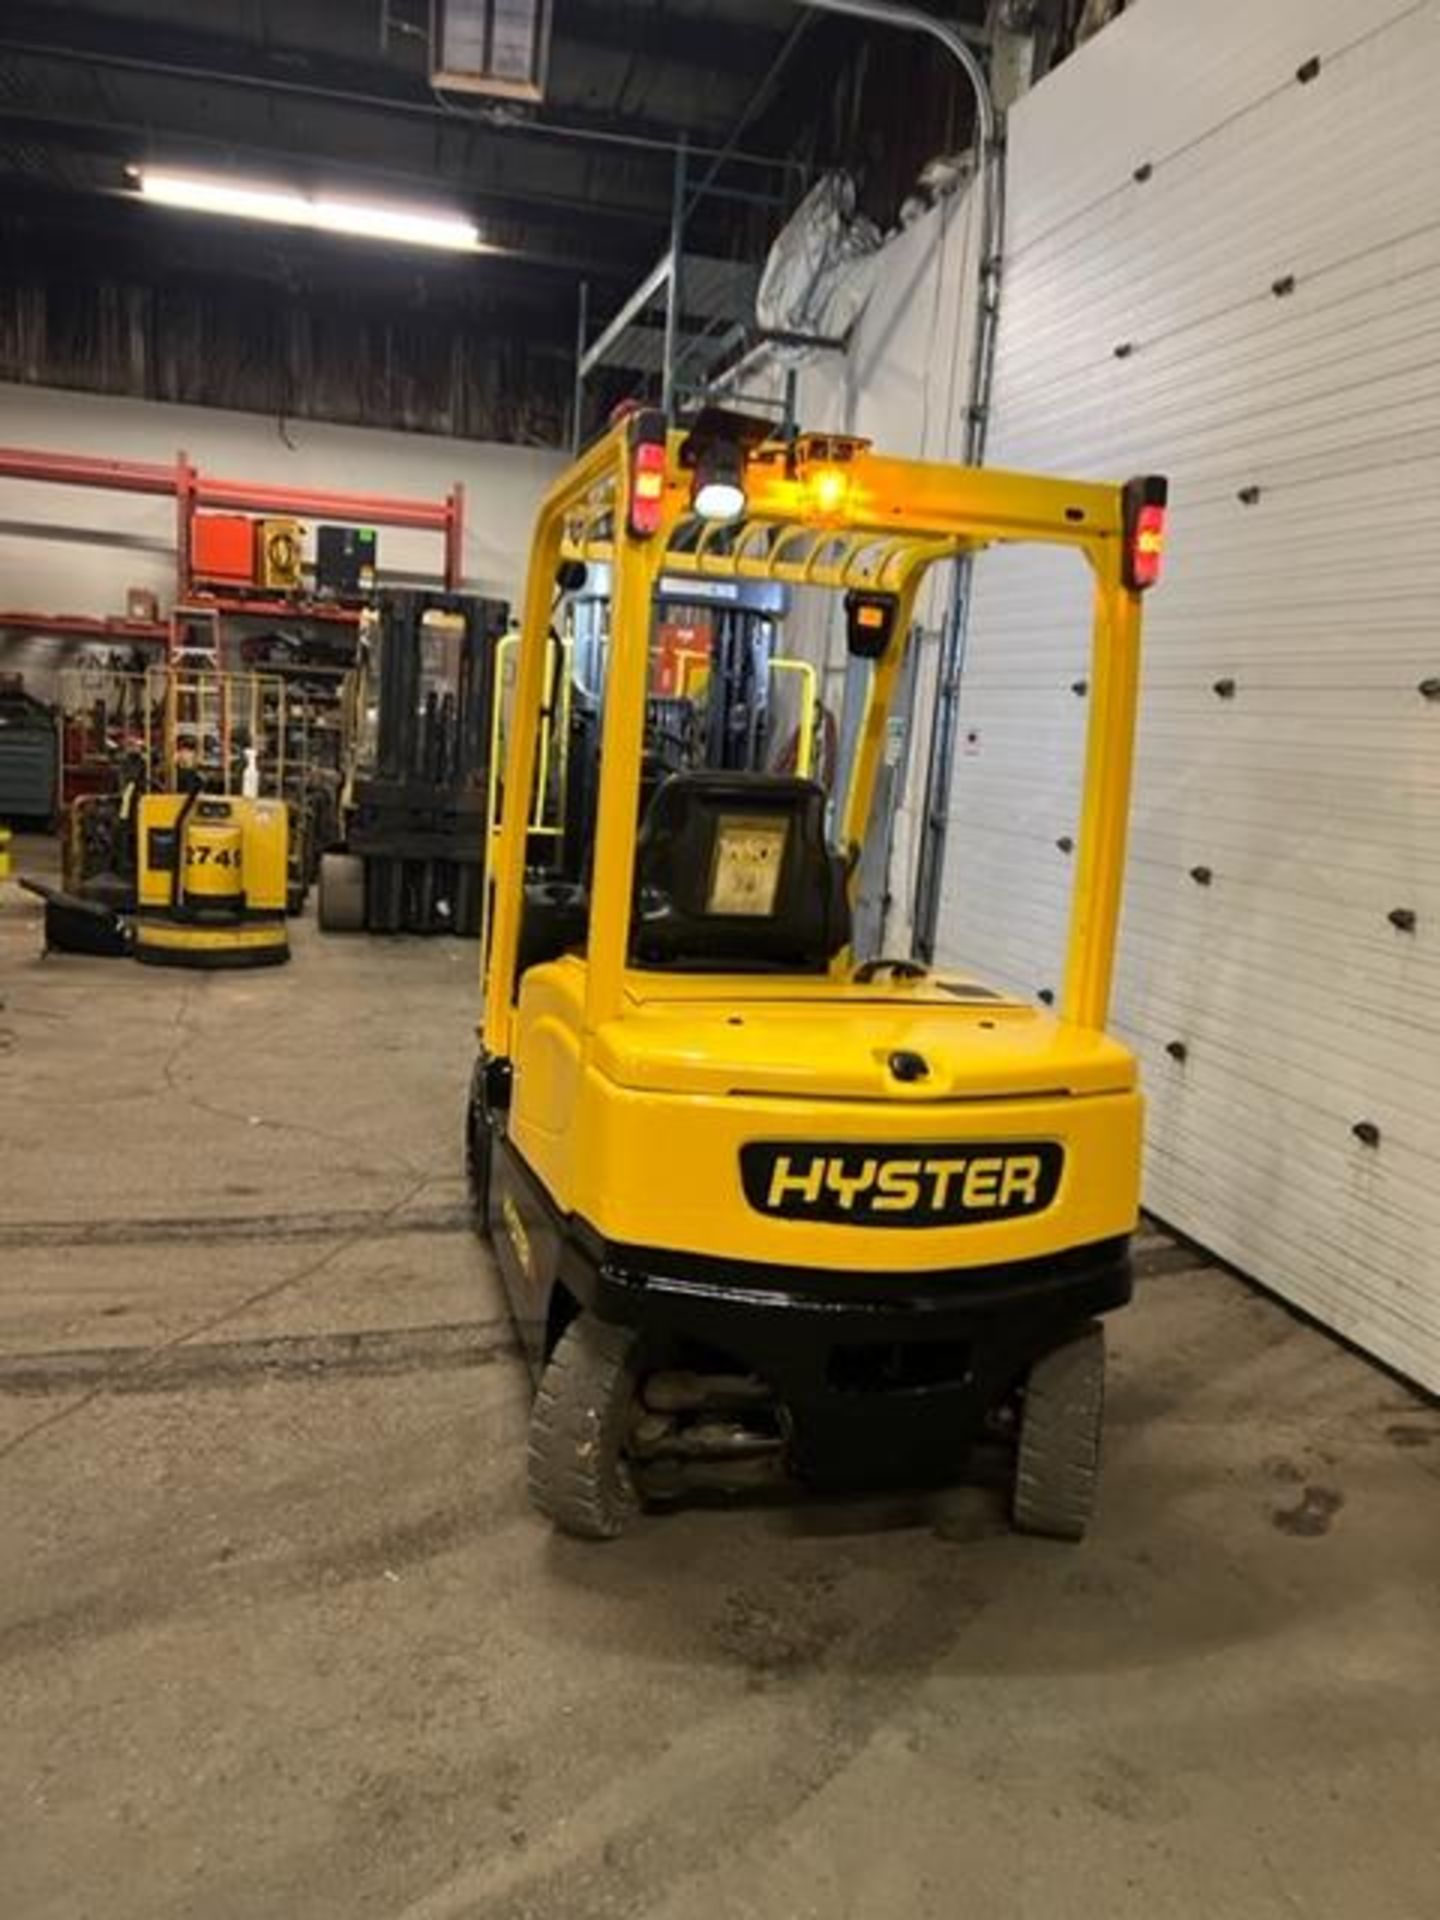 FREE CUSTOMS - MINT LIKE NEW 2015 Hyster model 50 - 5,000lbs Capacity Indoor Outdoor Forklift - Image 3 of 4